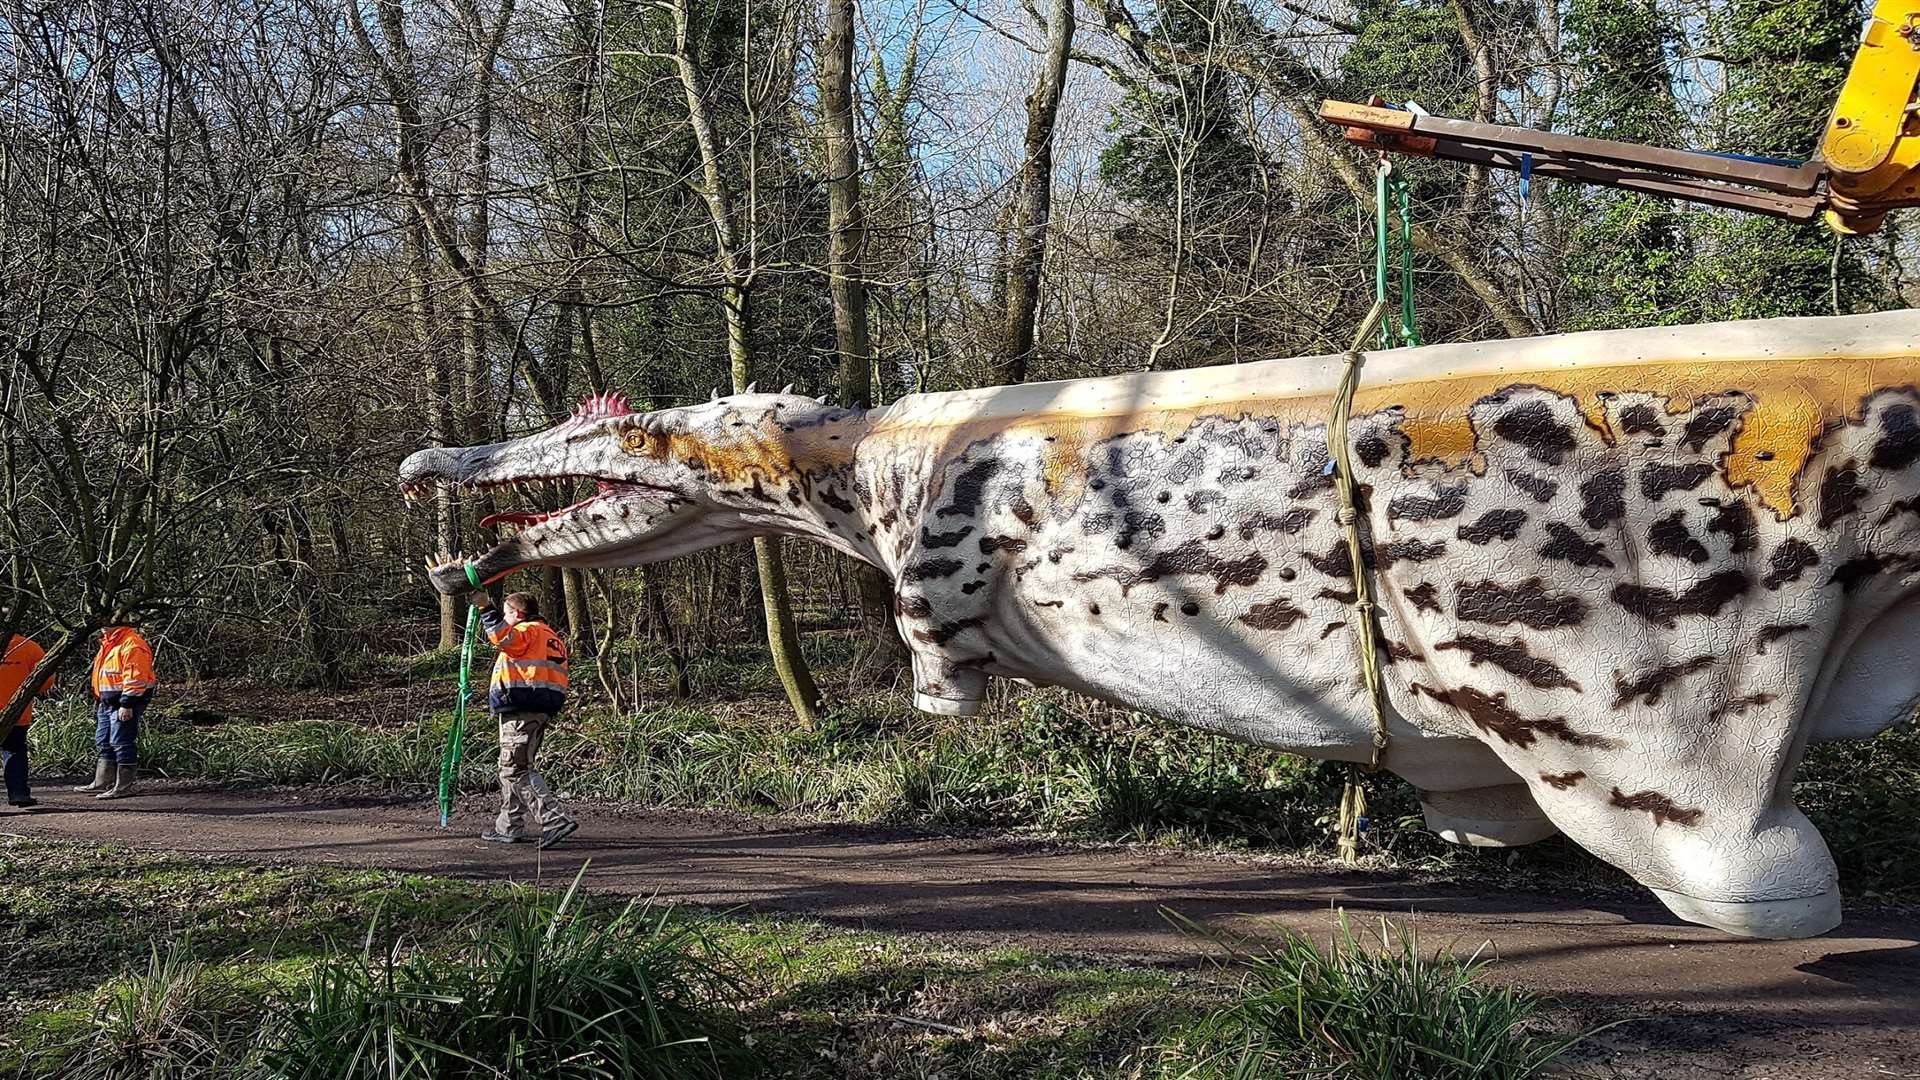 The Spinosaurus arrives at Port Lympne